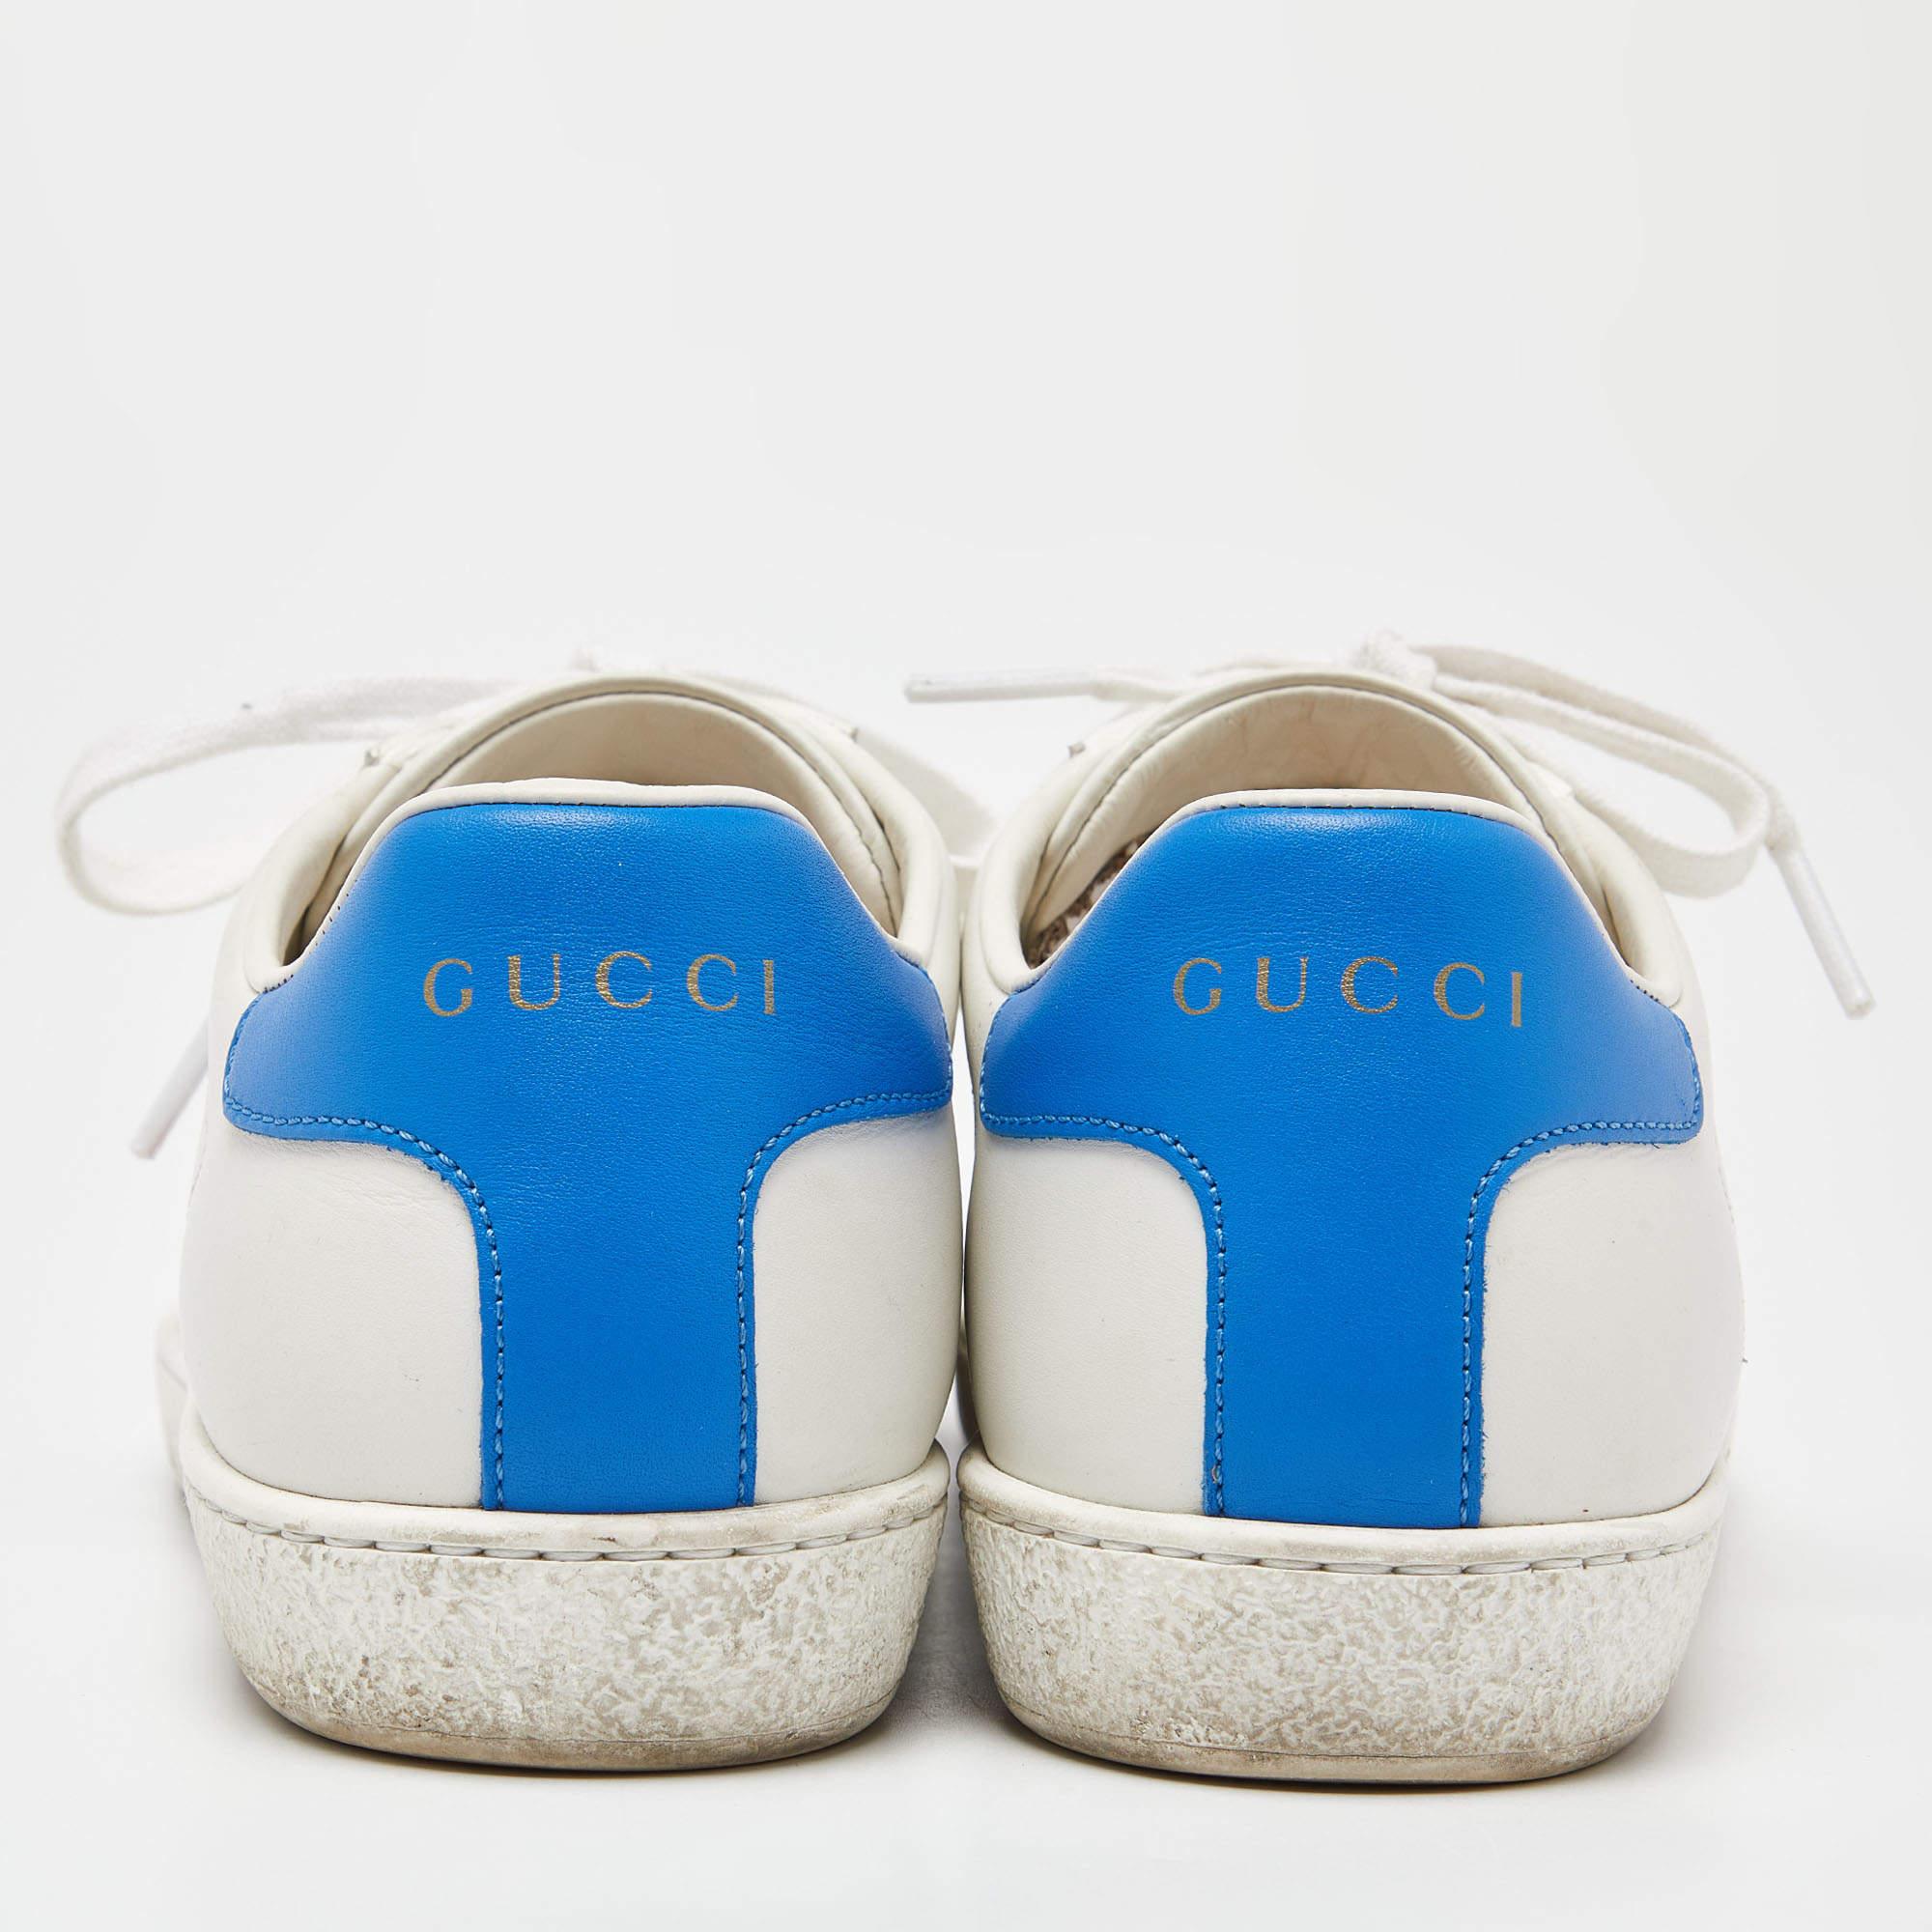 Gucci x Disney White/Blue Leather Huey, Dewey and Louie Ace Sneakers Size 36 In Excellent Condition For Sale In Dubai, Al Qouz 2